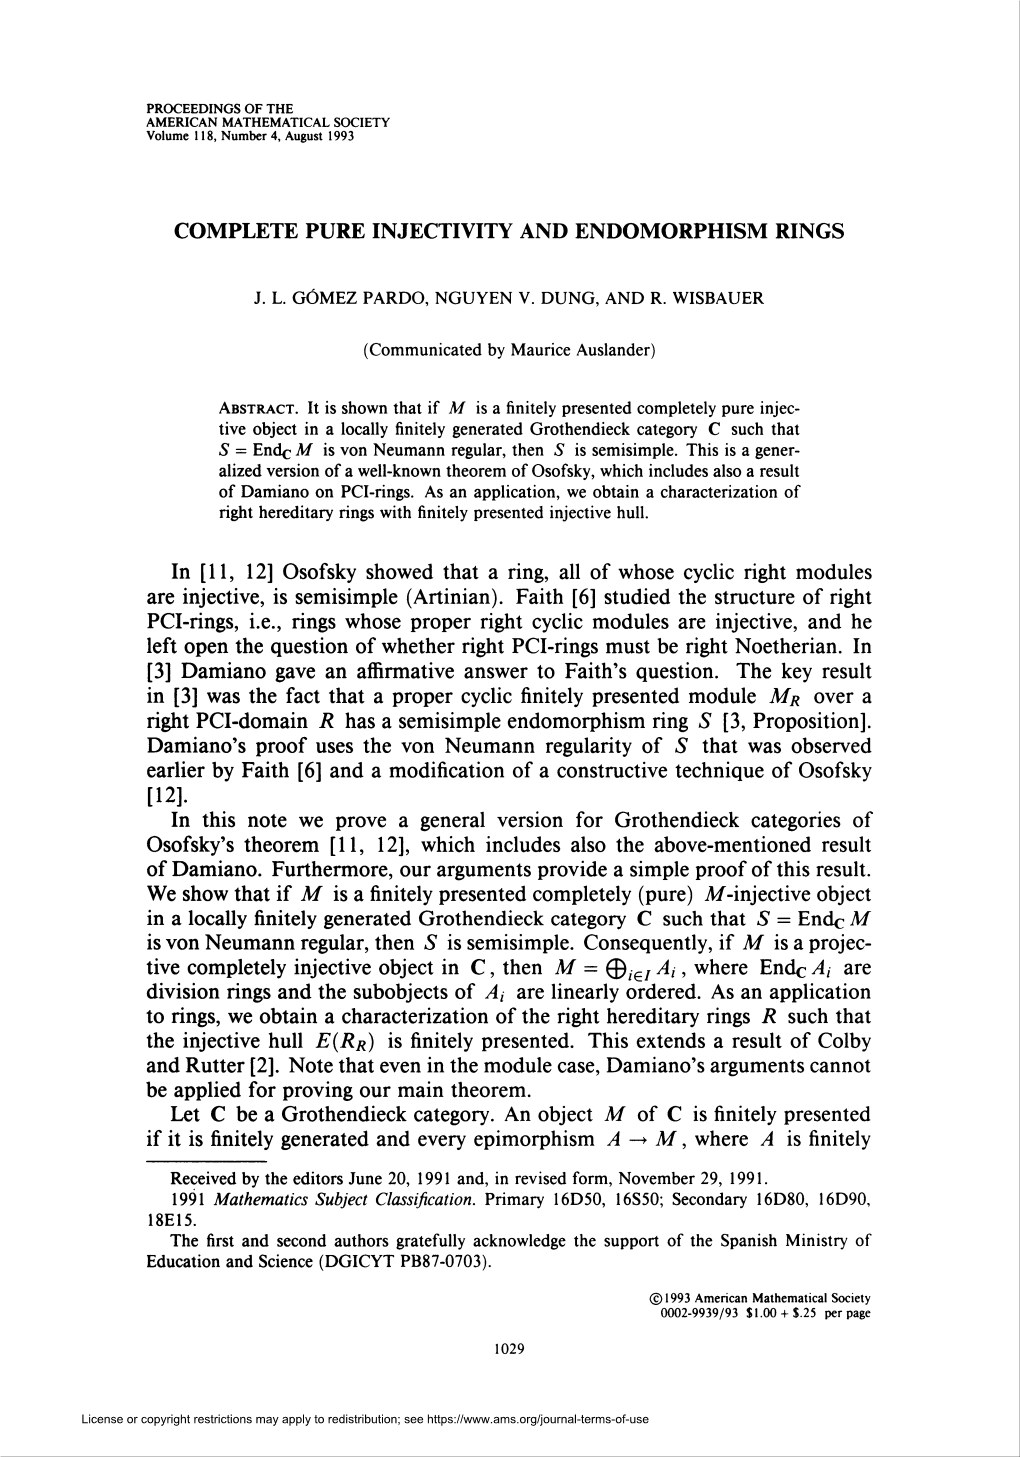 Complete Pure Injectivity and Endomorphism Rings [12]